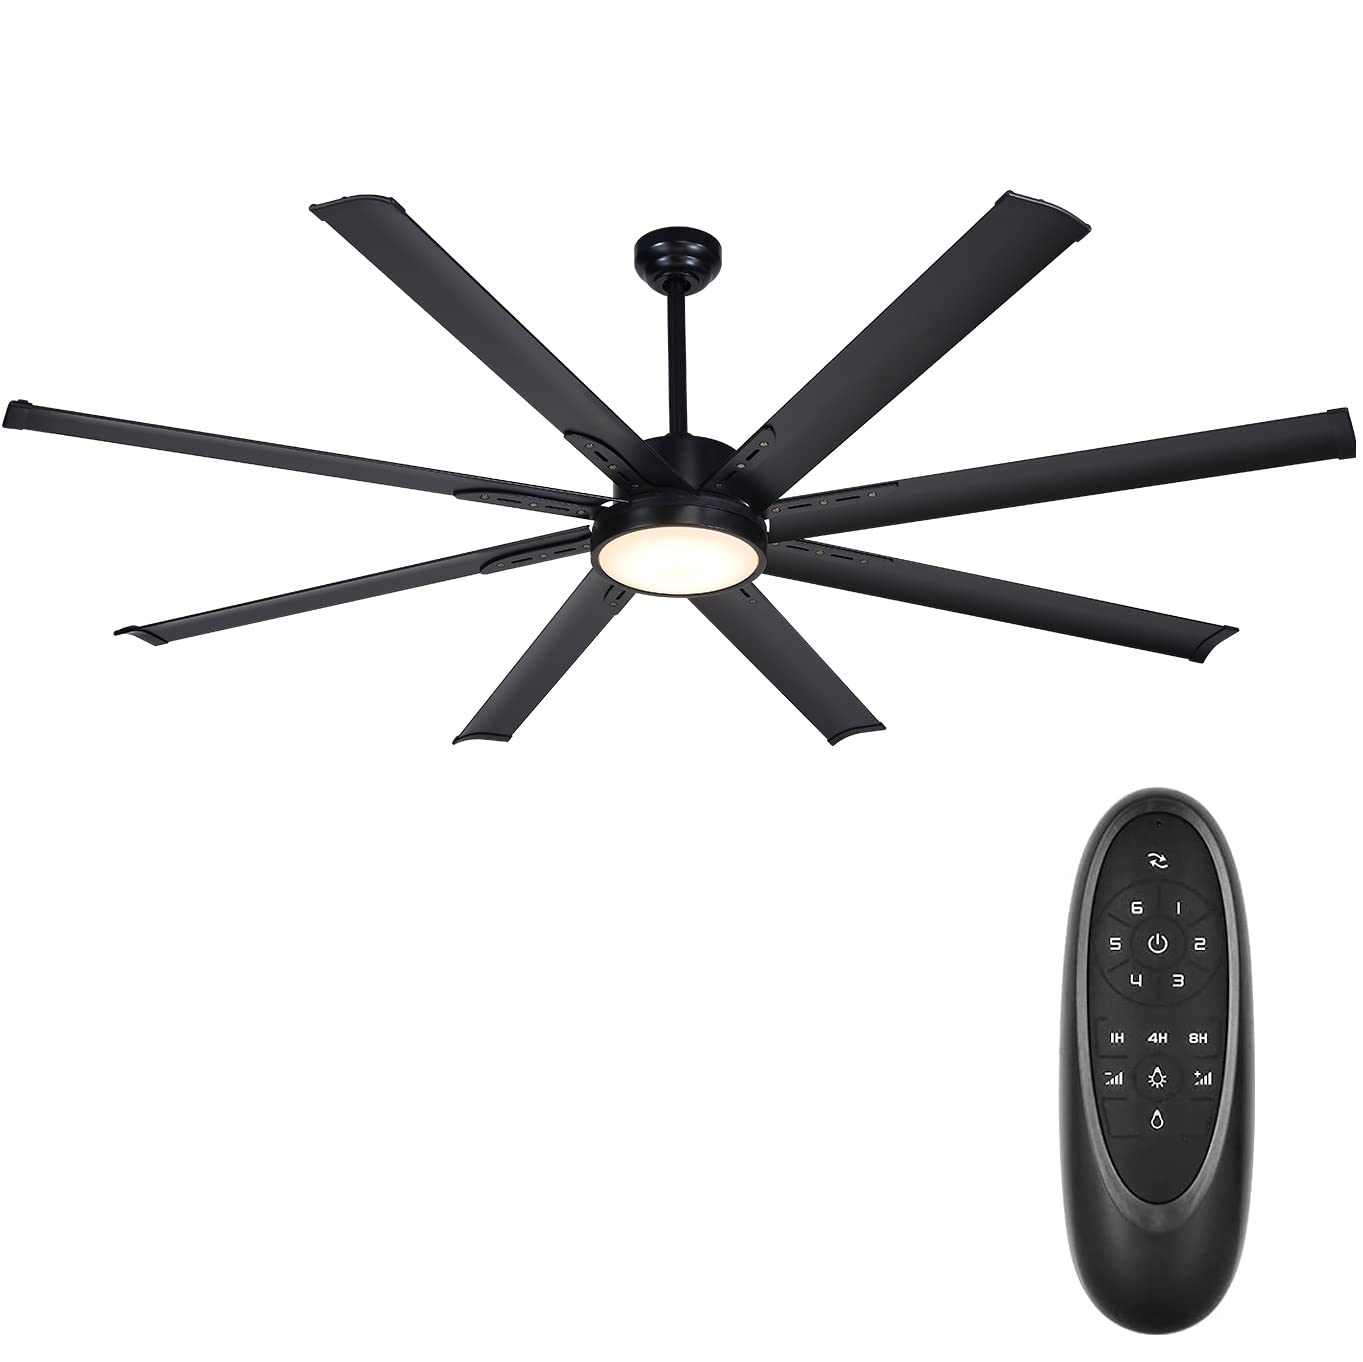 BiGizmos 72 Inch Industrial DC Motor Ceiling Fan with LED Light